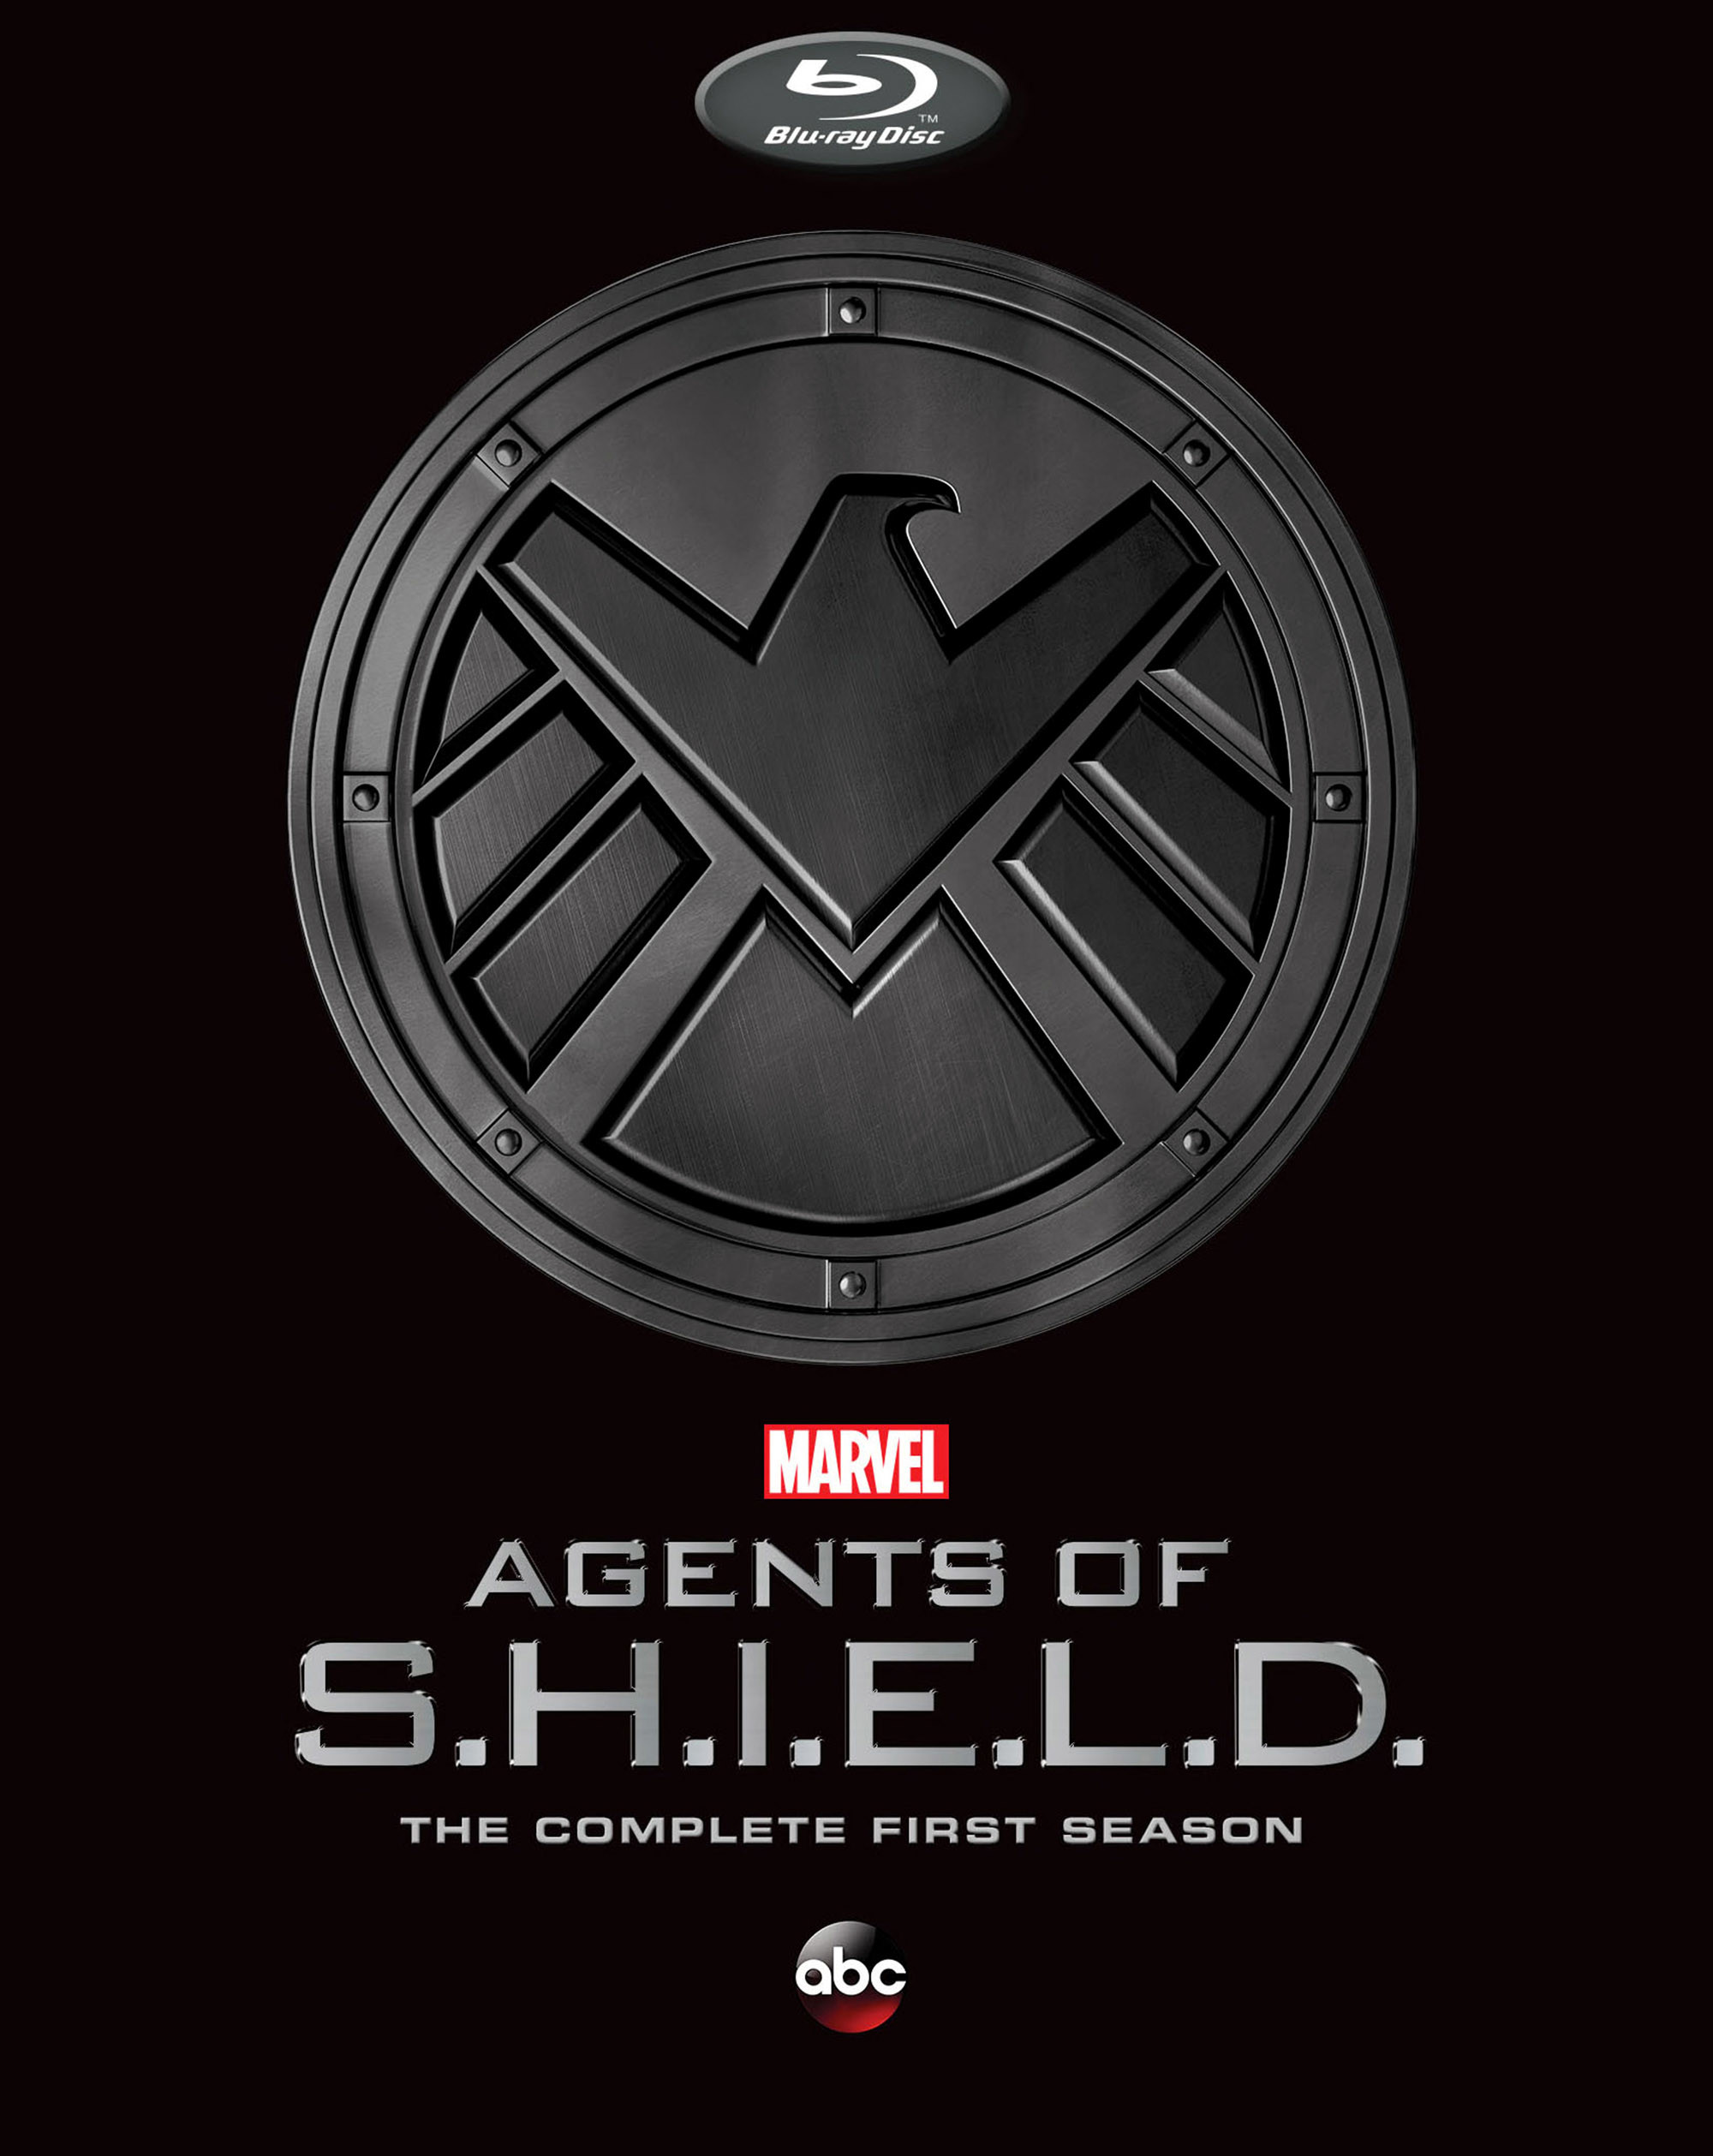 Marvels Agents of SHIELD Phone Wallpaper  Moviemania  Agents of  shield Marvel agents of shield Marvels agents of shield